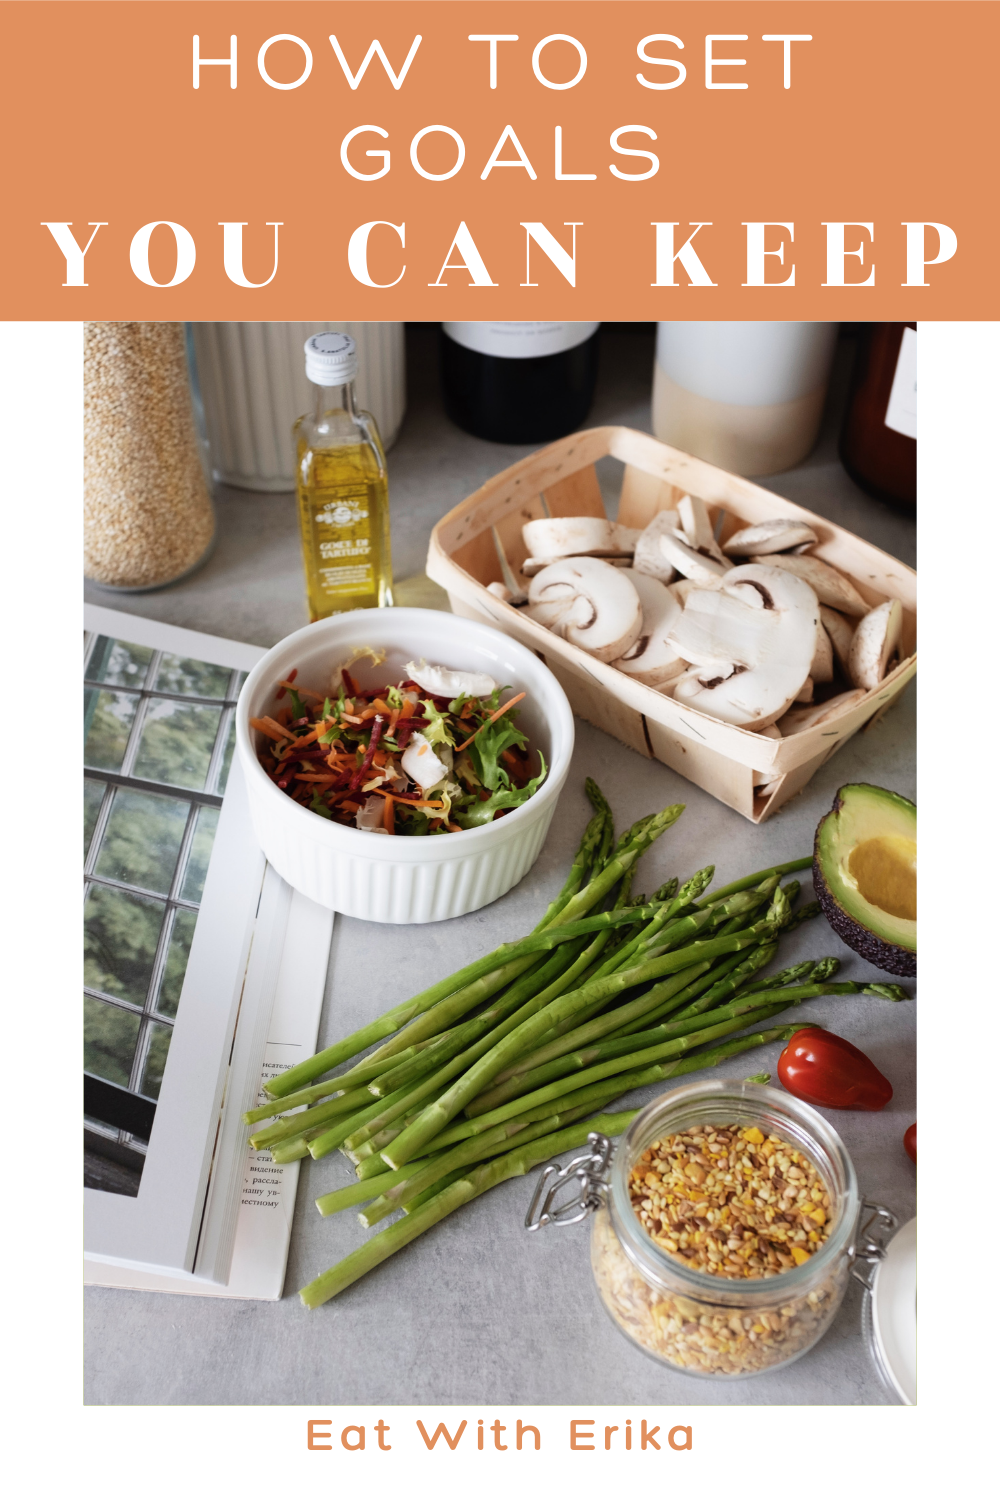 kitchen counter with asparagus, mushrooms, olive oil and cookbook, how to set goals you can keep